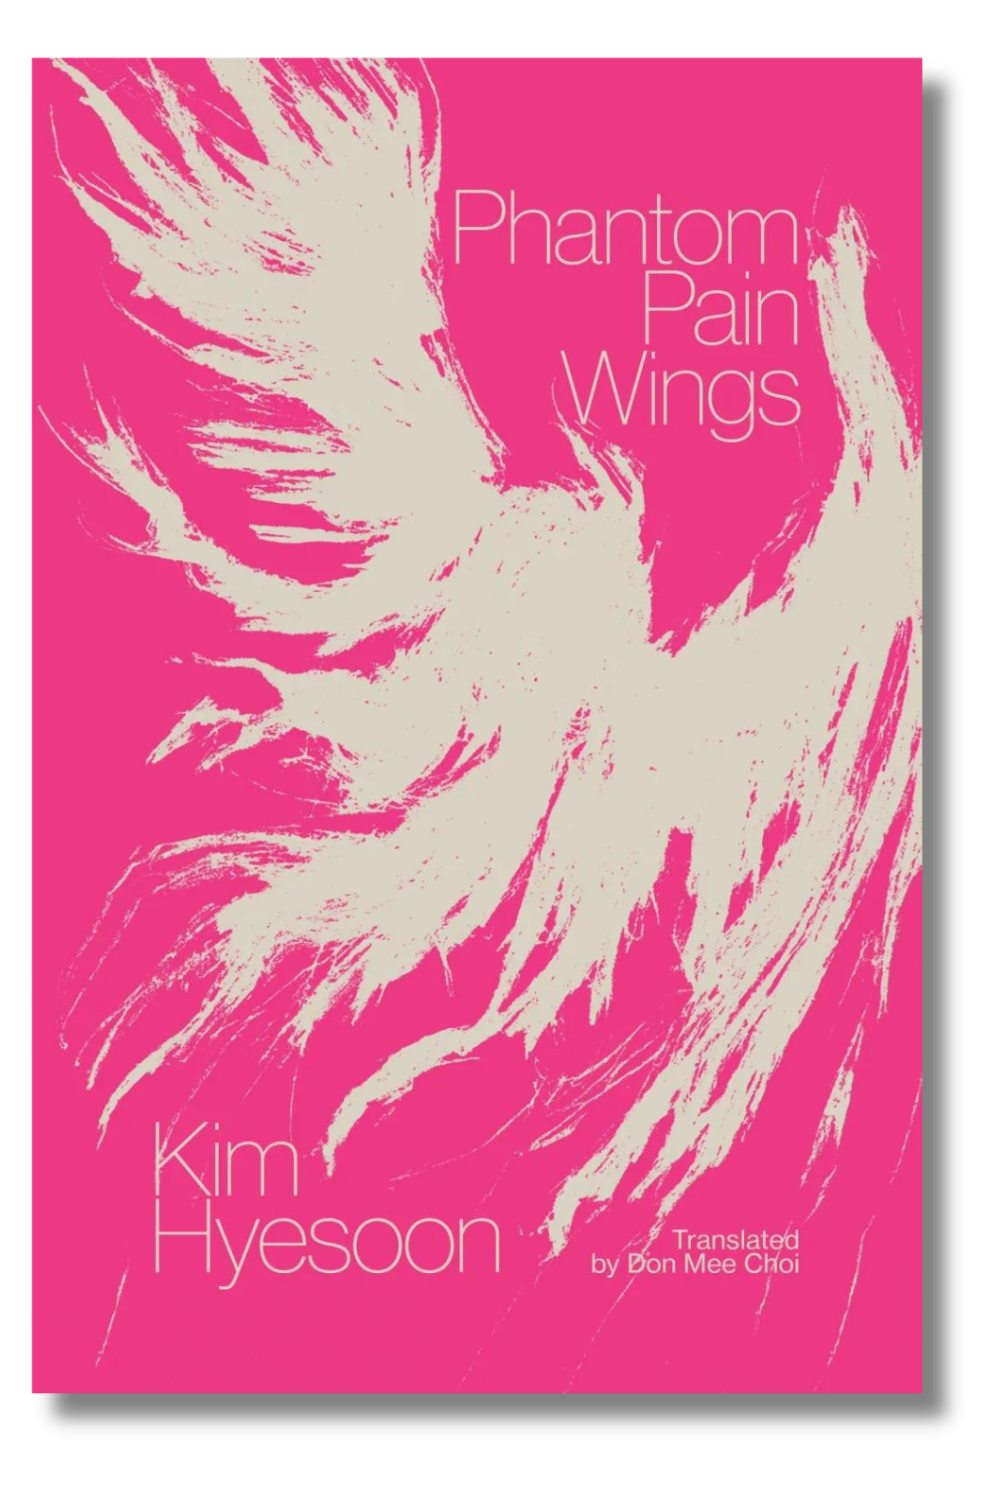 The cover of Kim Hyesoon's "Phantom Pain Wings"